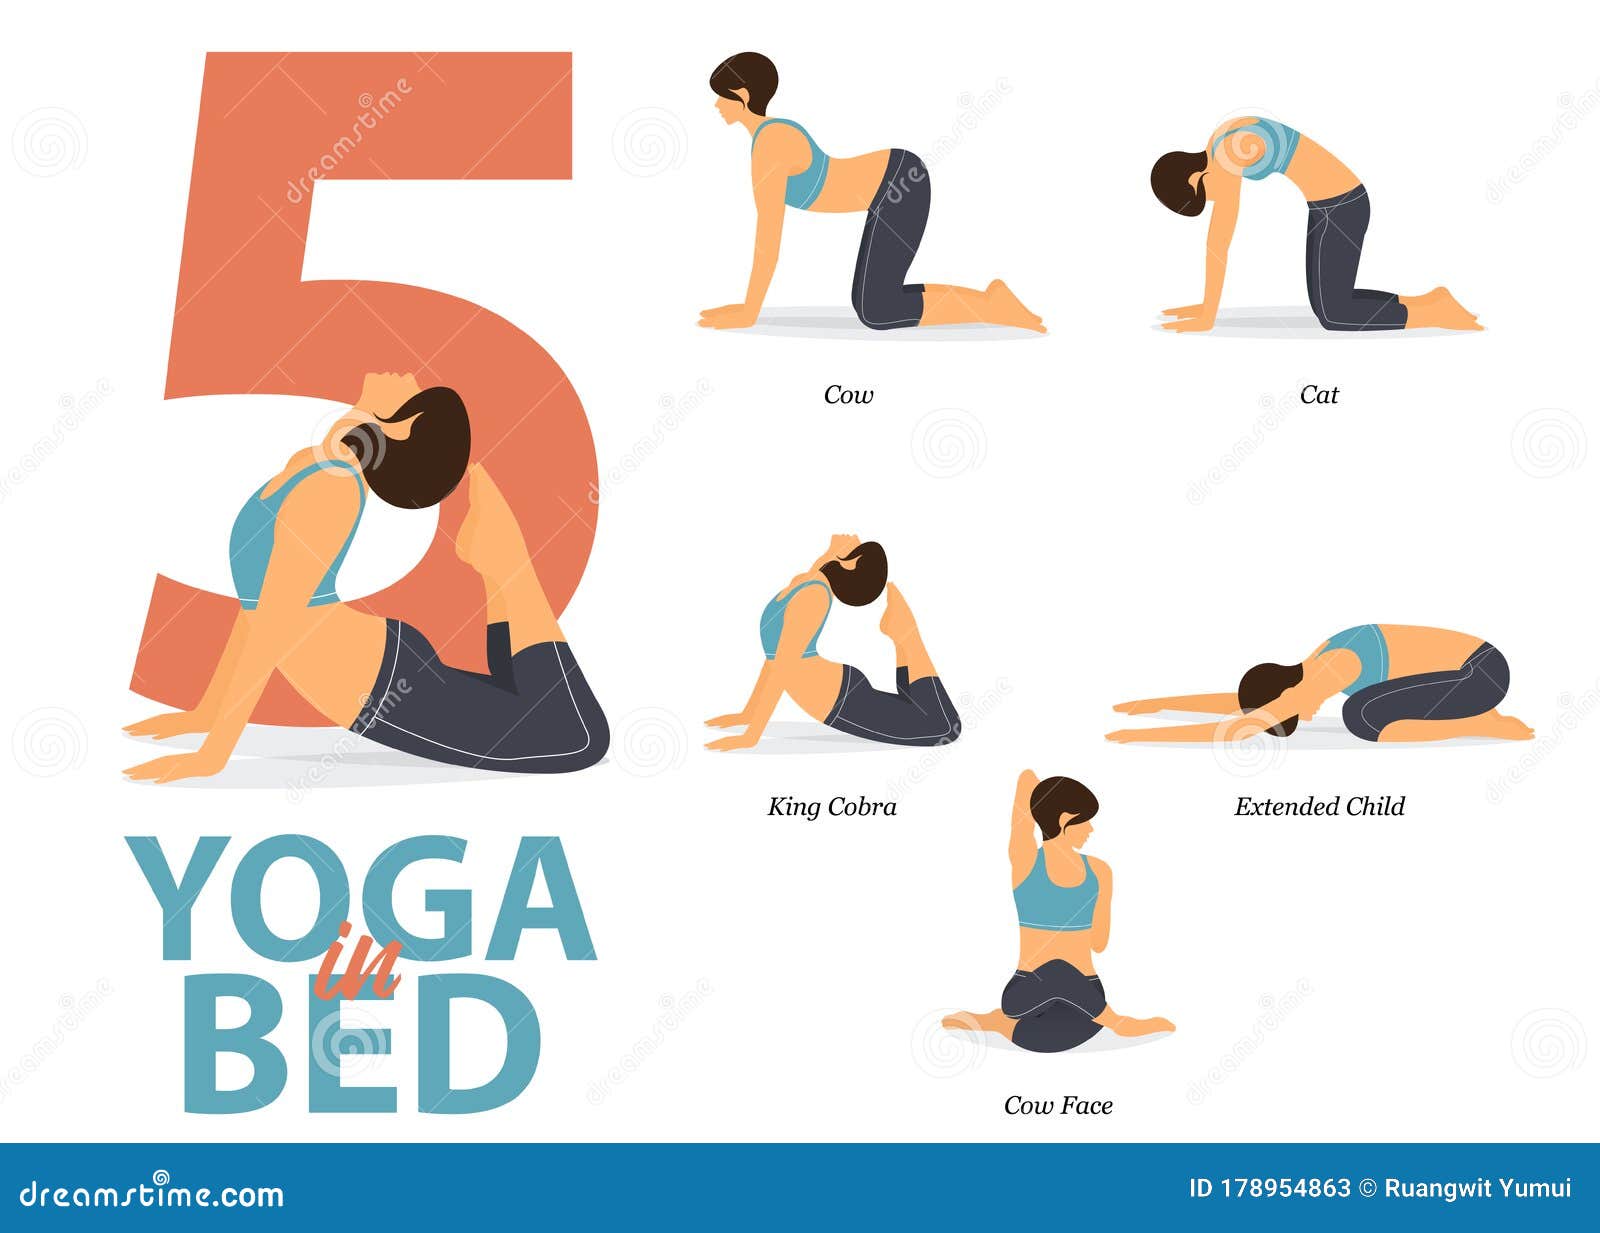 Infographic Yoga Poses Easy Yoga Home Flat Design Beauty Woman Stock Vector  by ©tond.ruangwit@gmail.com 362598770